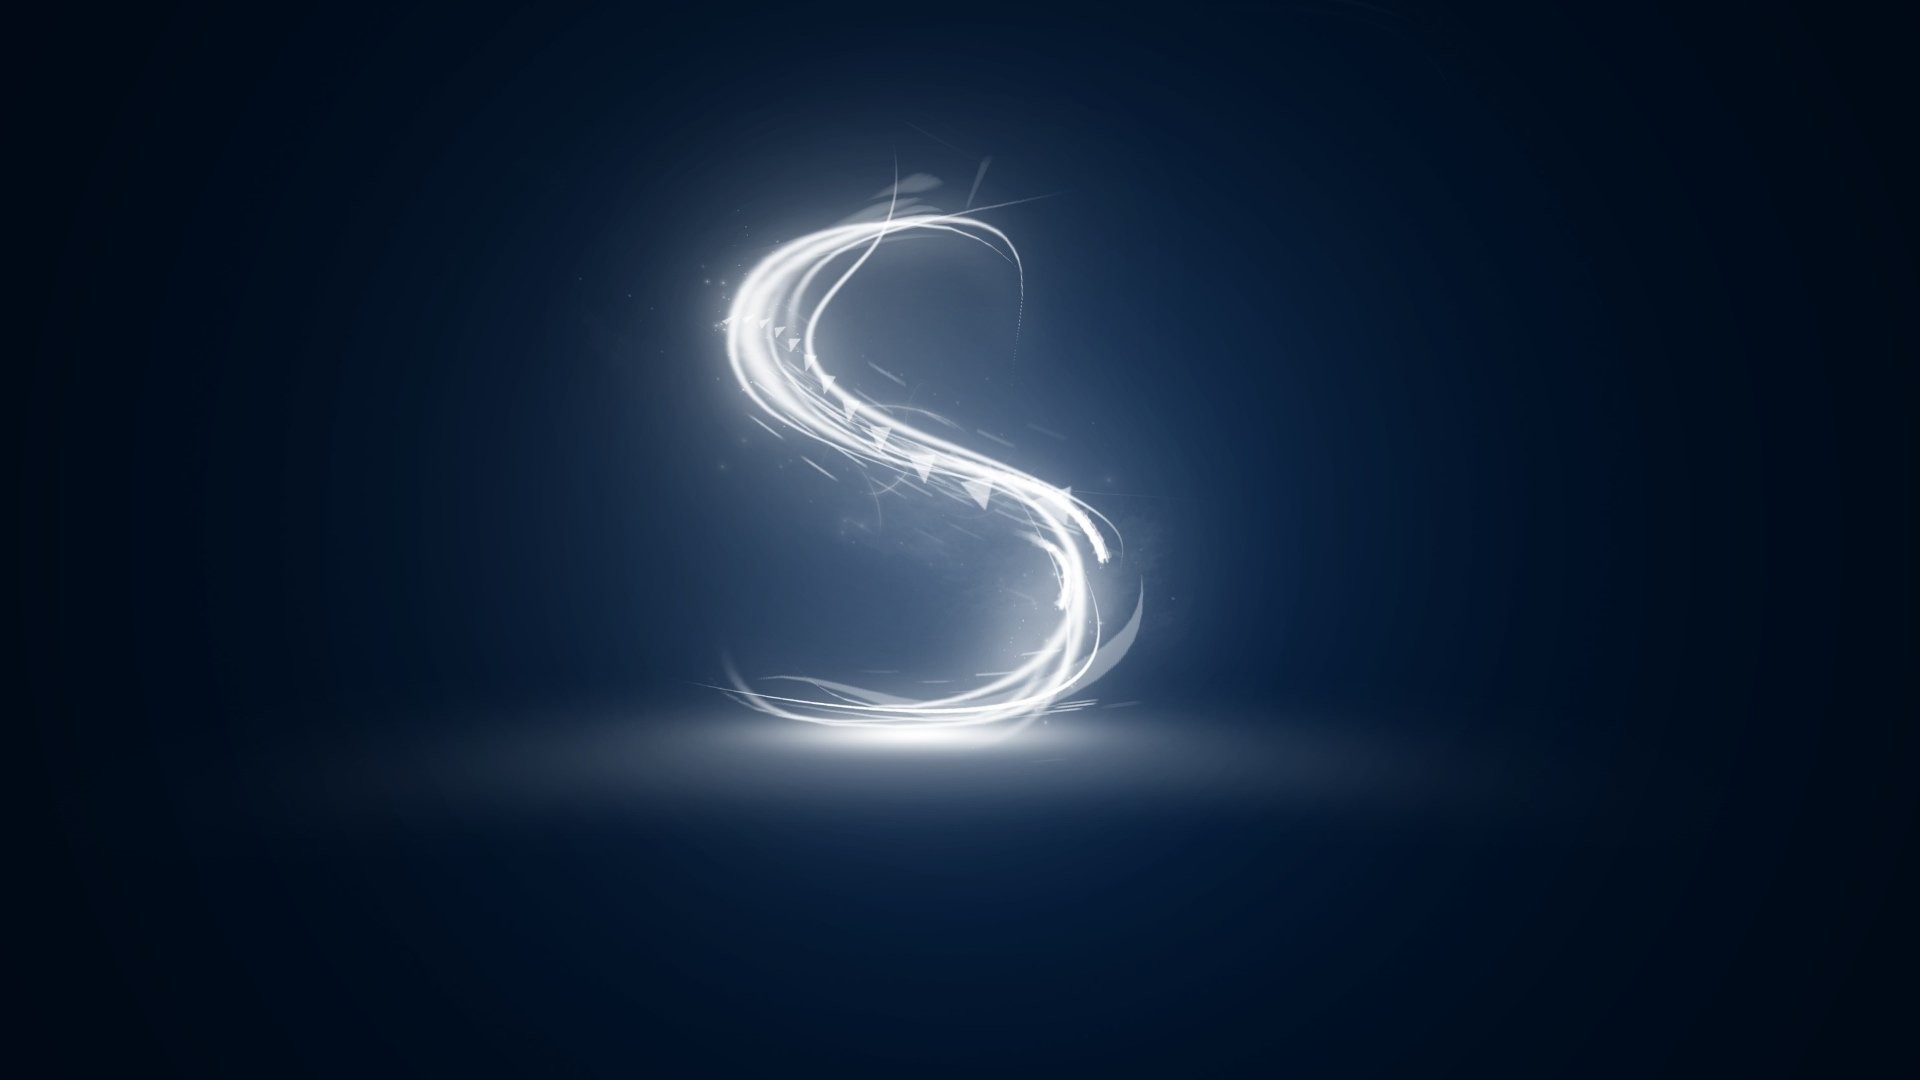 Letter S Wallpapers For Mobile HD Wallpapers Download Free Map Images Wallpaper [wallpaper684.blogspot.com]